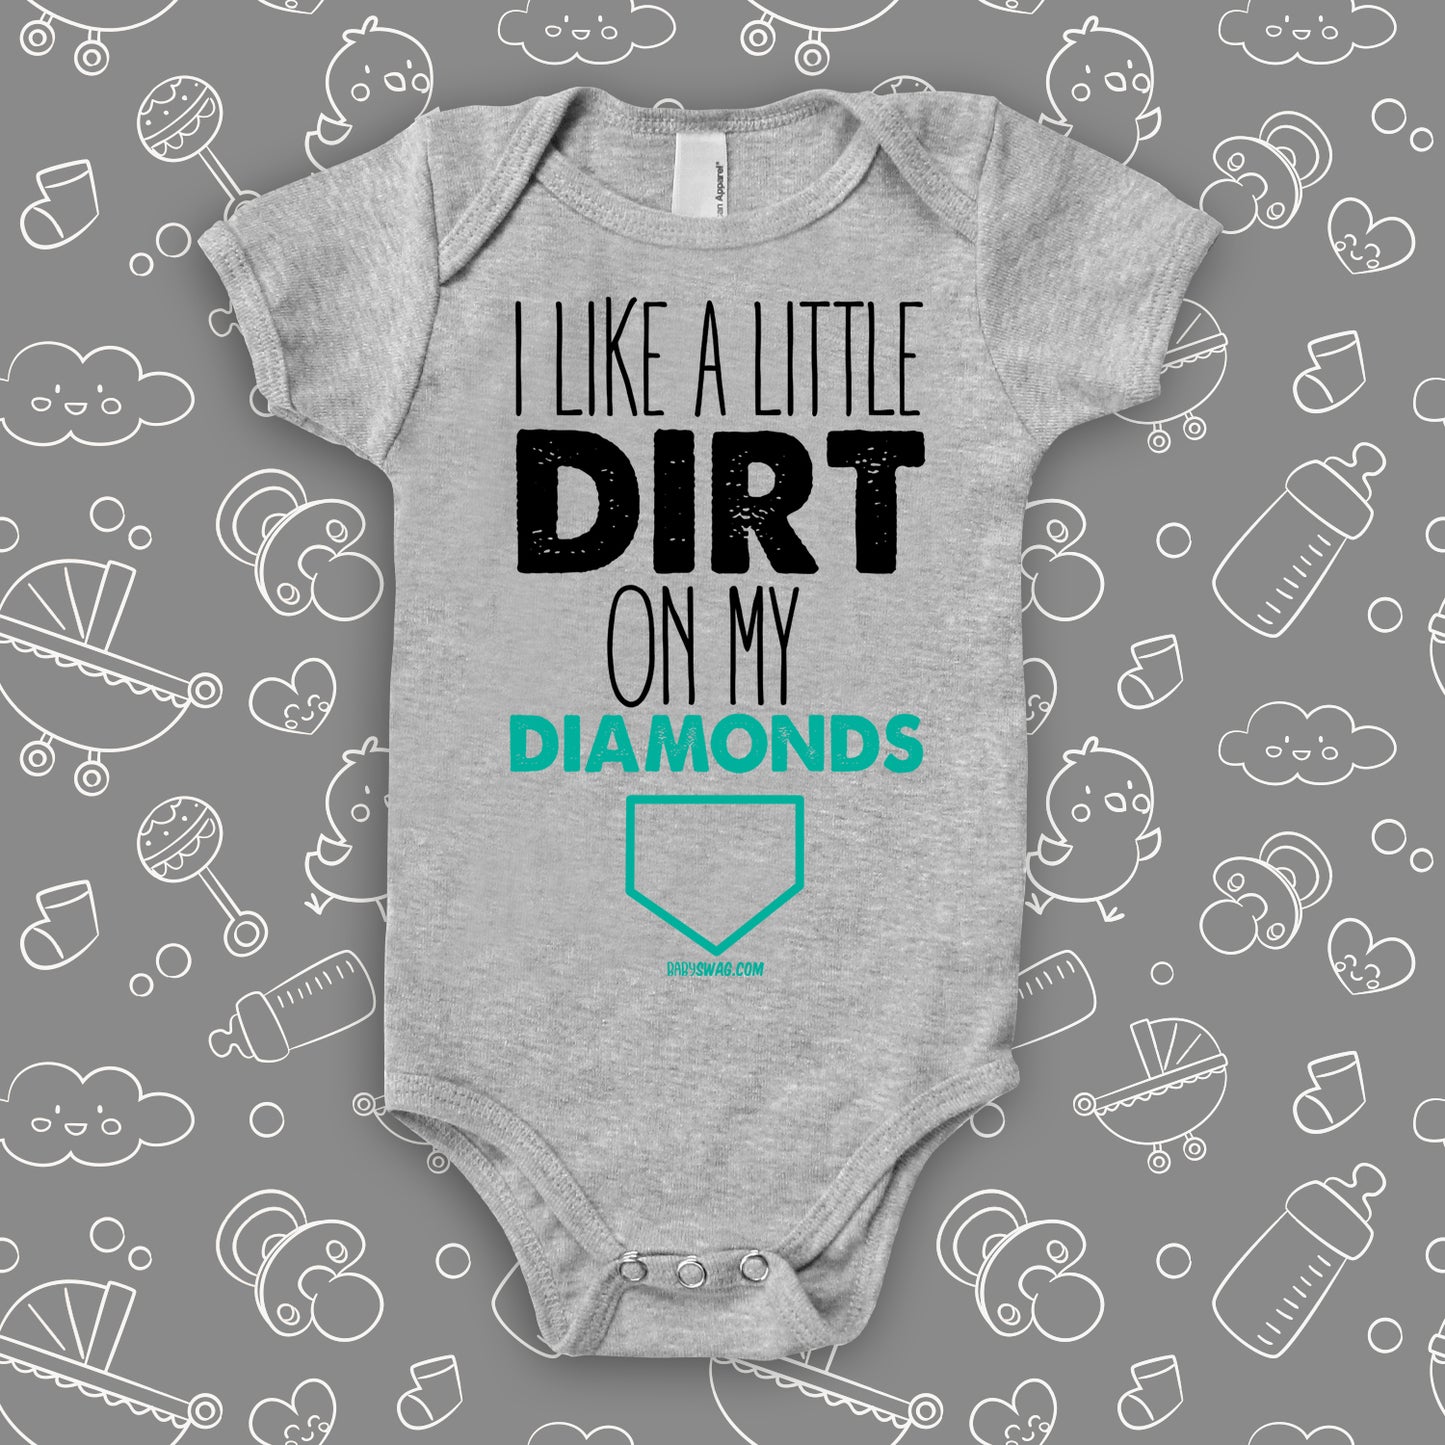 Cute baby boy onesies with saying "I Like A Little Dirt On My Diamonds" in grey.